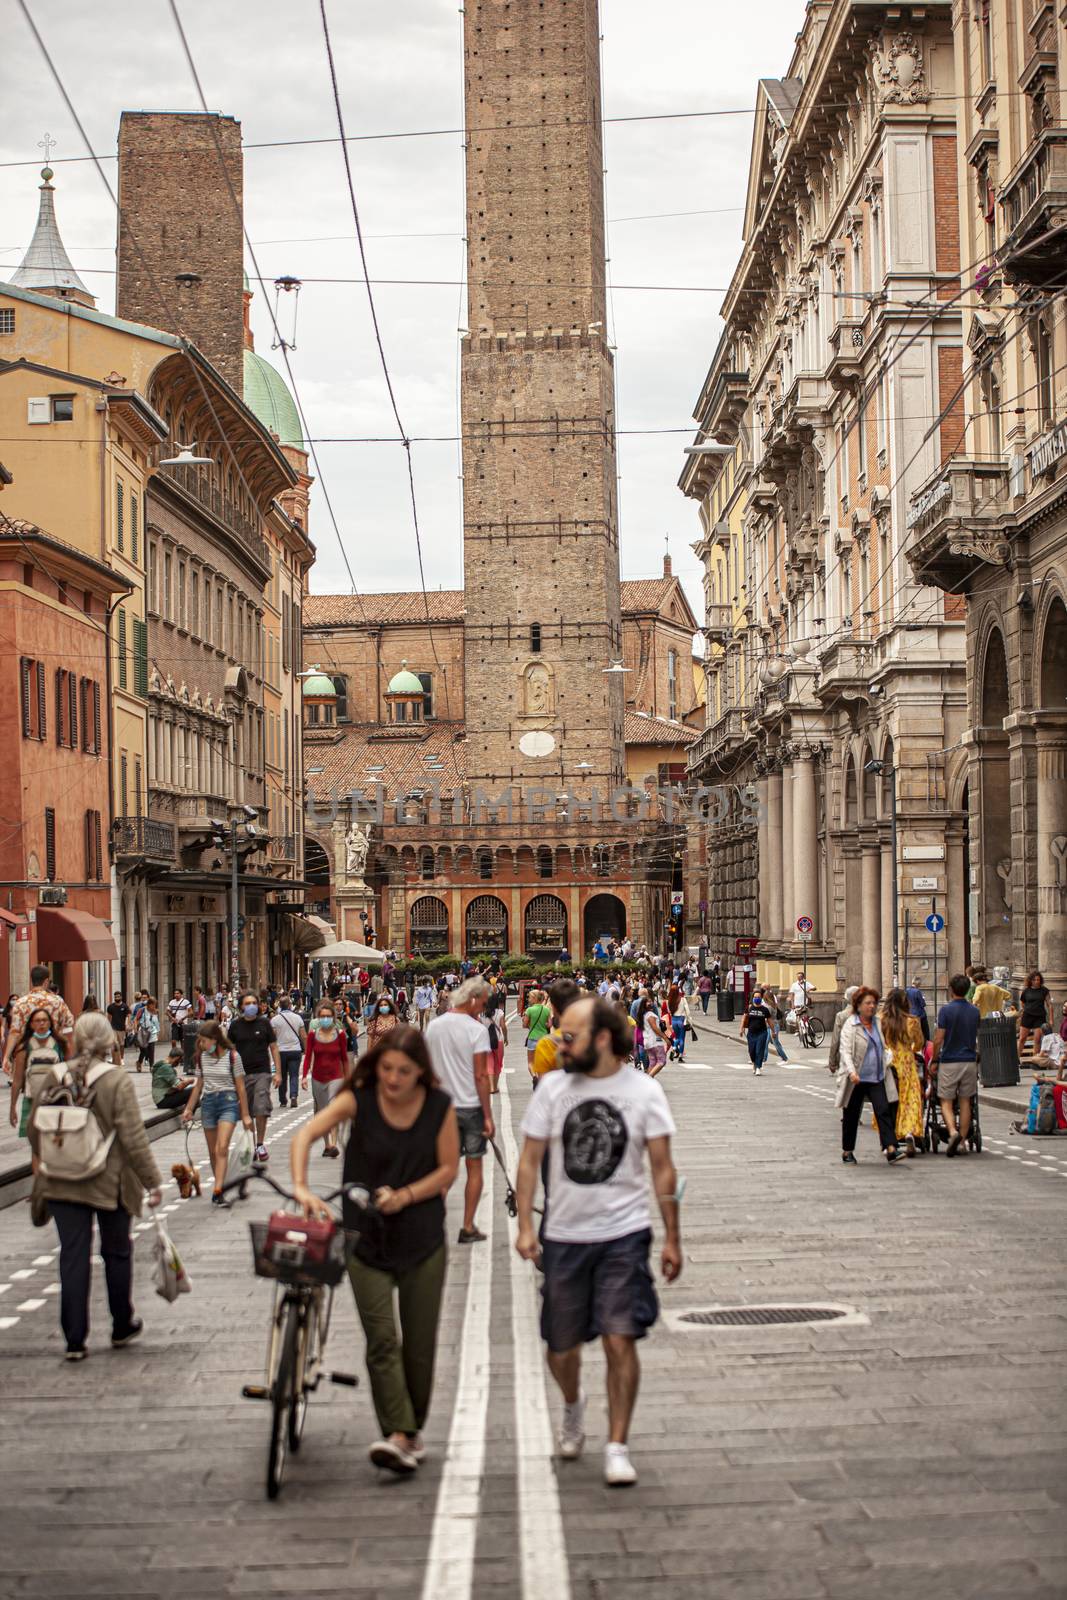 Via Rizzoli in Bologna, Italy with his historical Building and the Asinelli Tower at the end 17 by pippocarlot